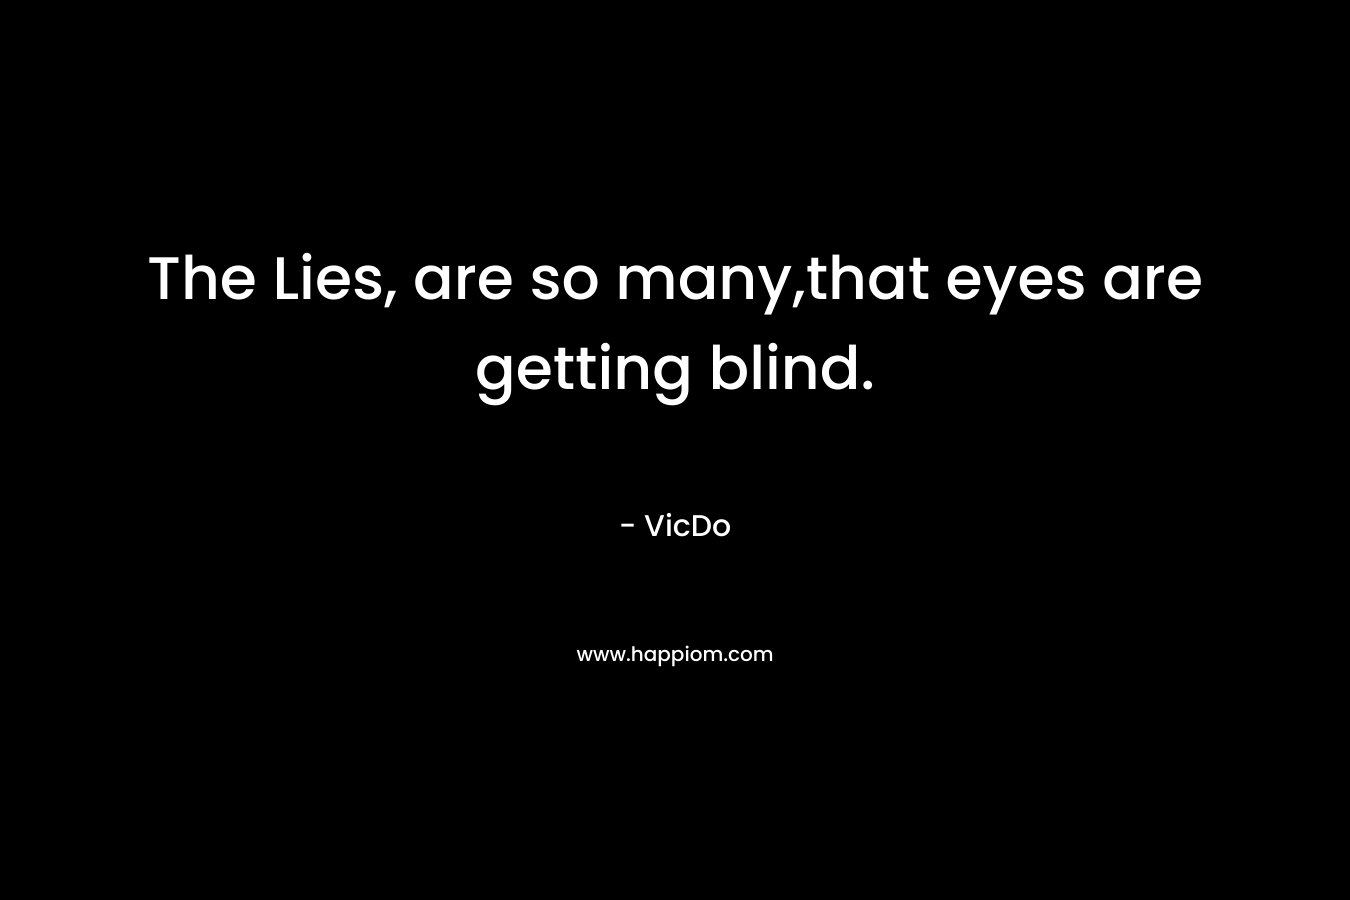 The Lies, are so many,that eyes are getting blind.